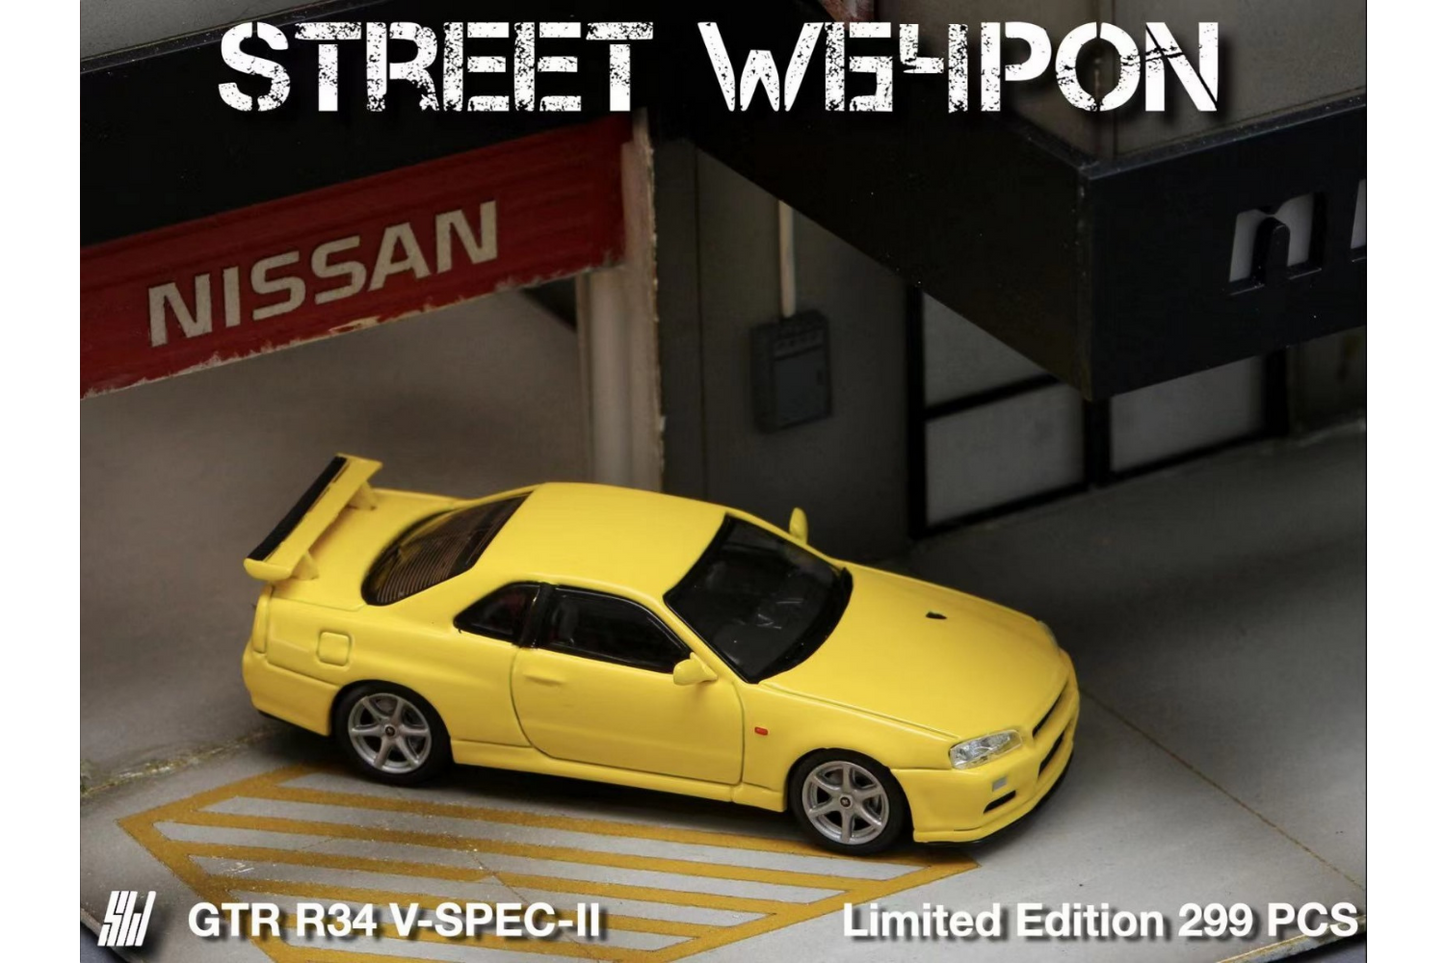 Street Weapon 1/64 Honda Civic EG6 in Knuckles Livery - Nissan Skyline GT-R (R34) V-Spec II in Yellow